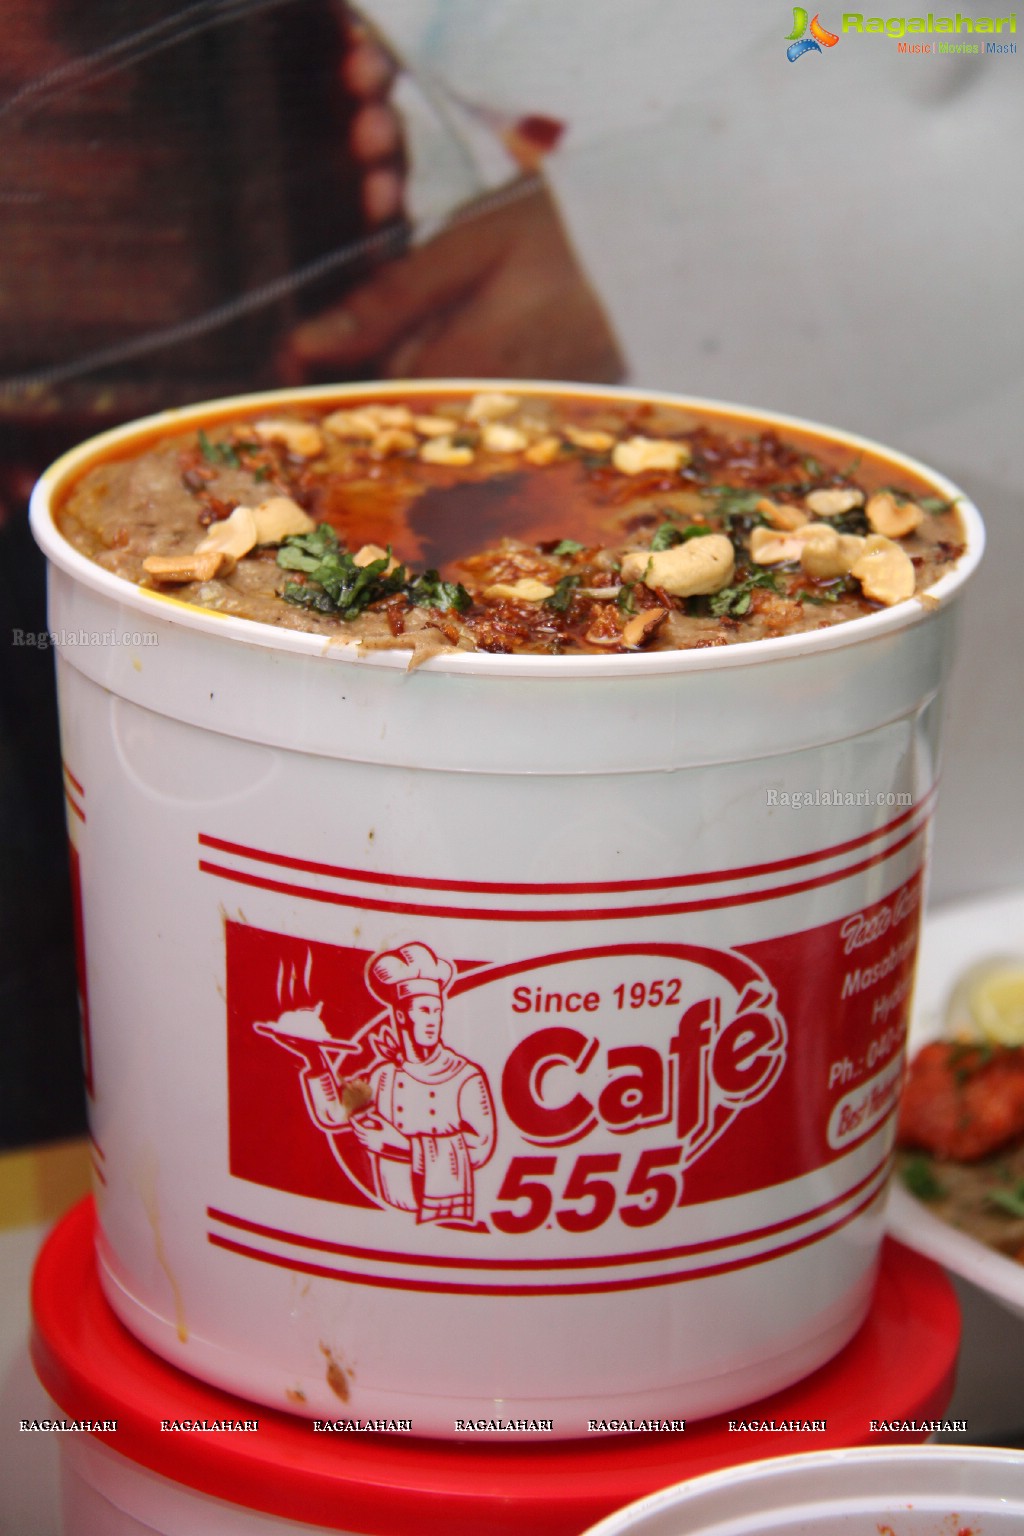 Launch of Season's Special Haleem at Cafe 555, Hyderabad